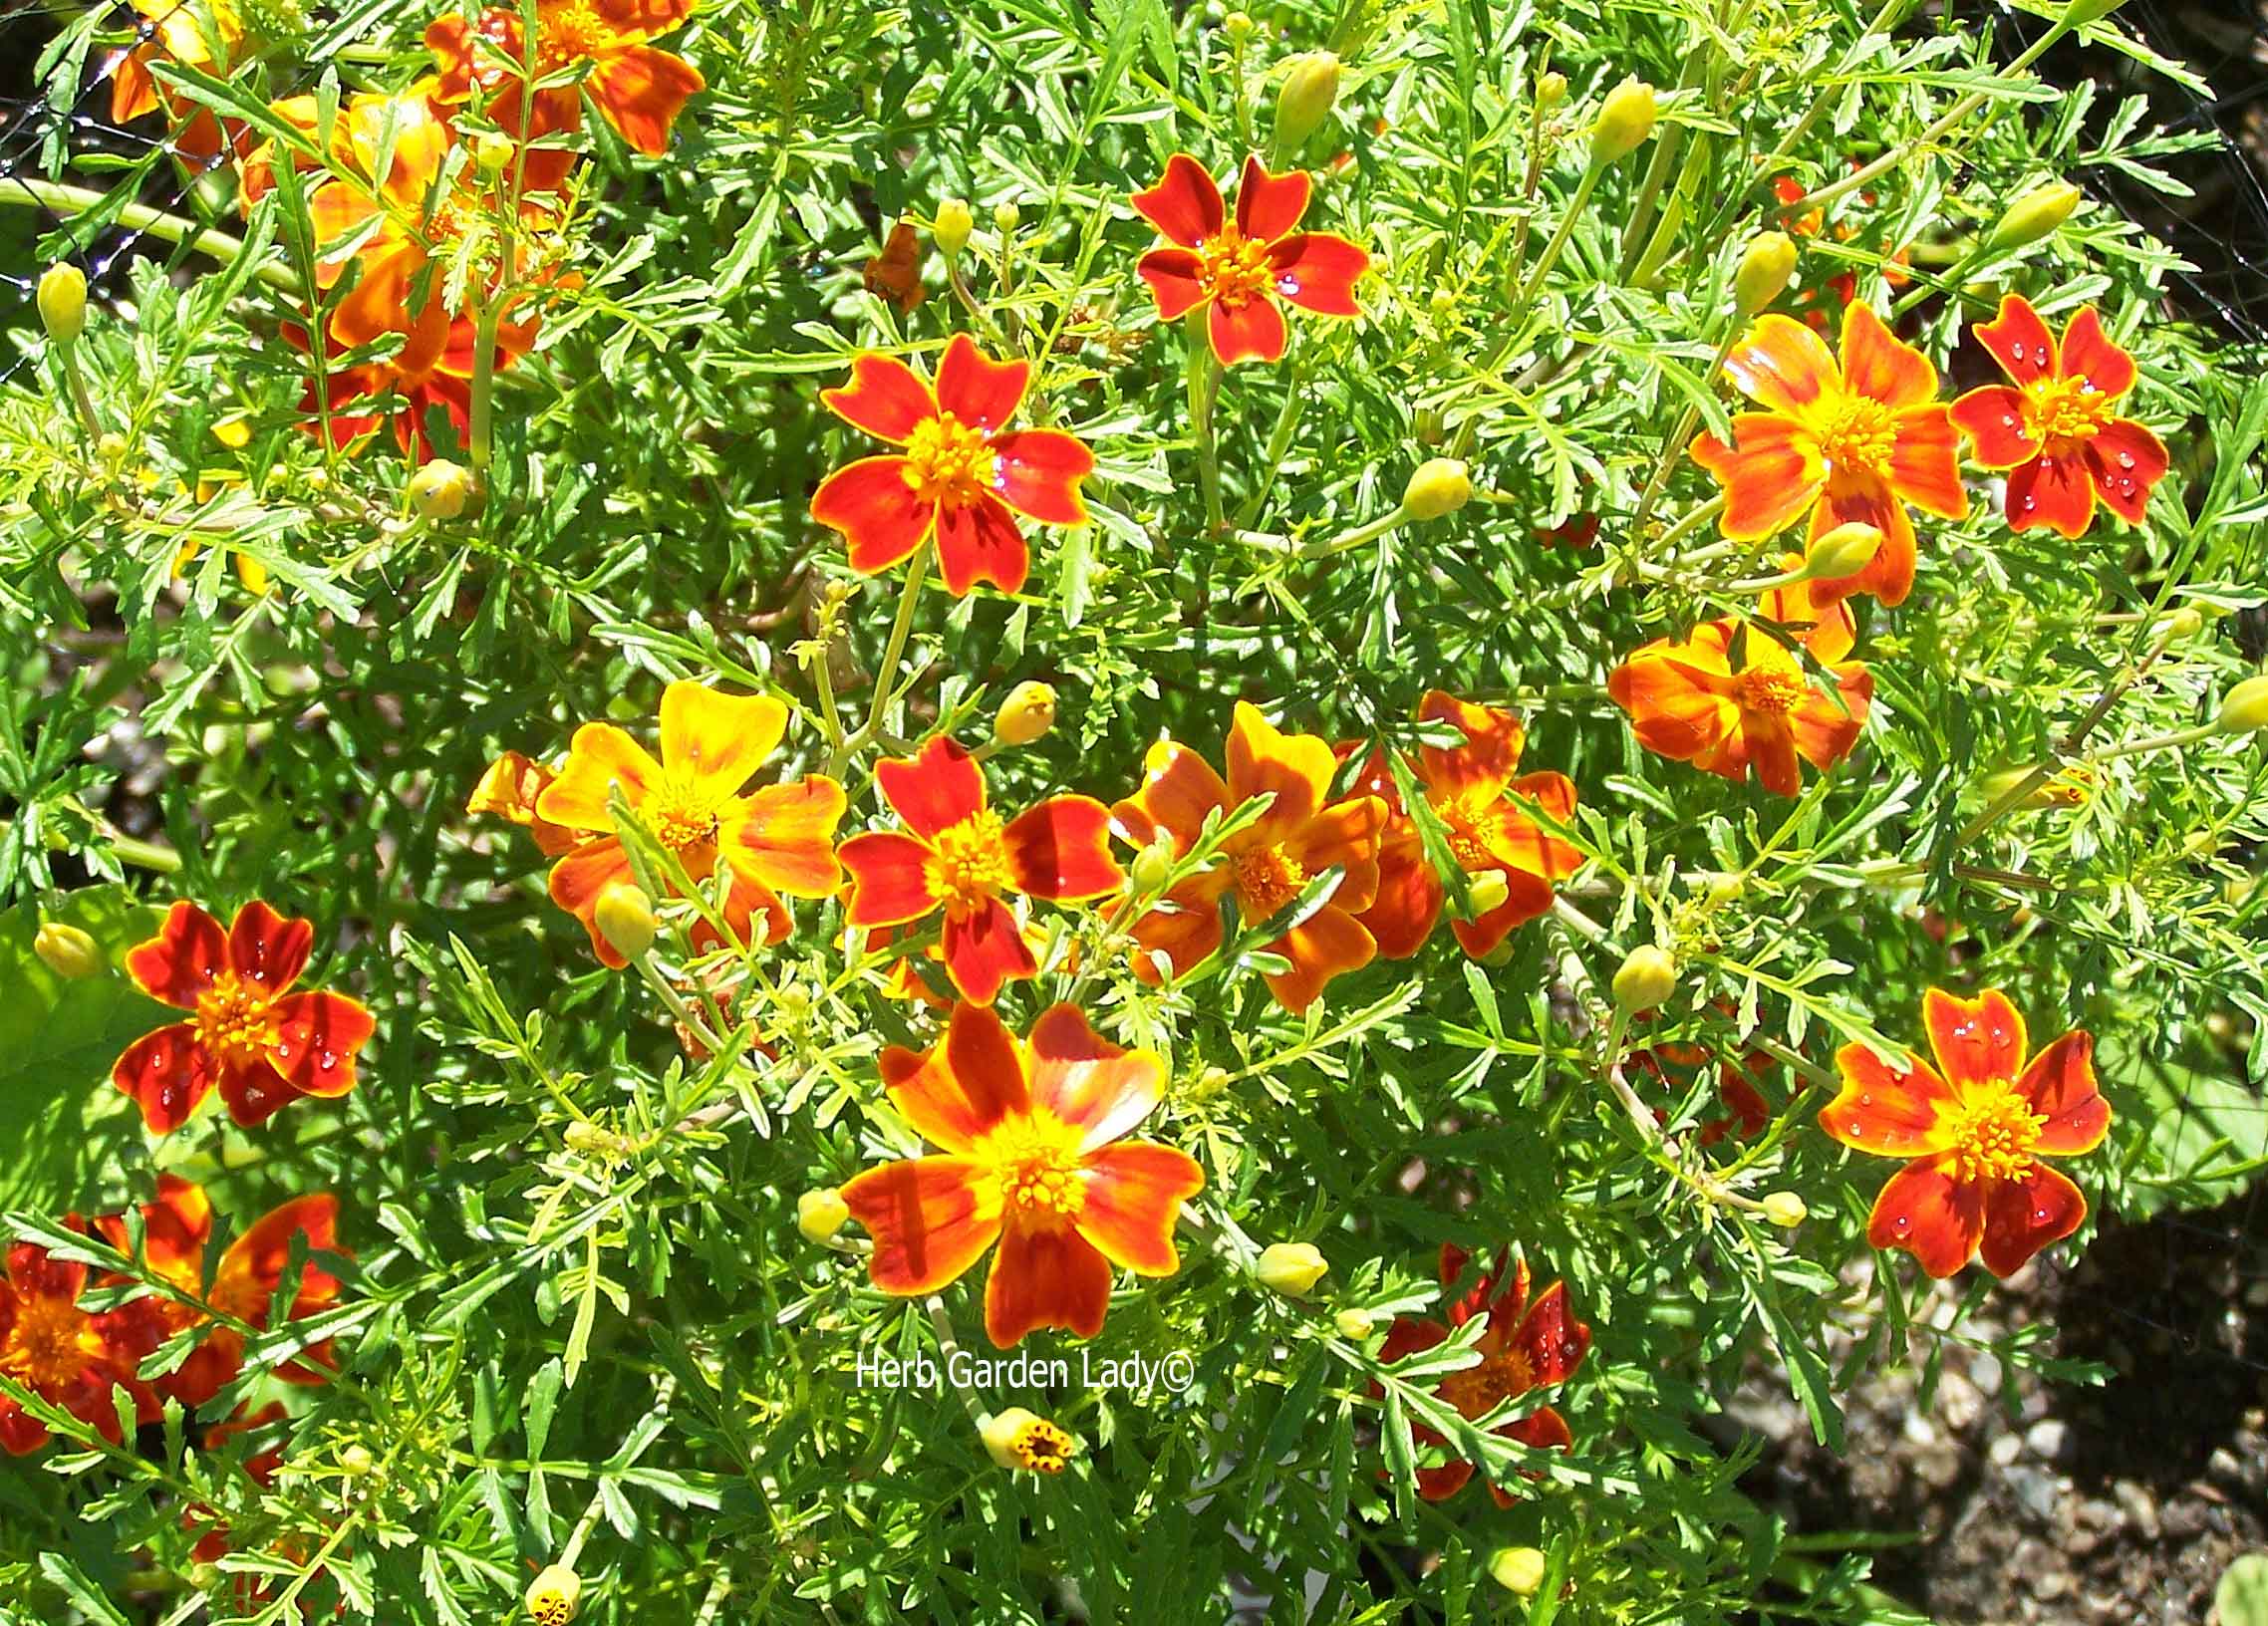 Marigolds, orange gem are another one that's easy to grown in raised beds.